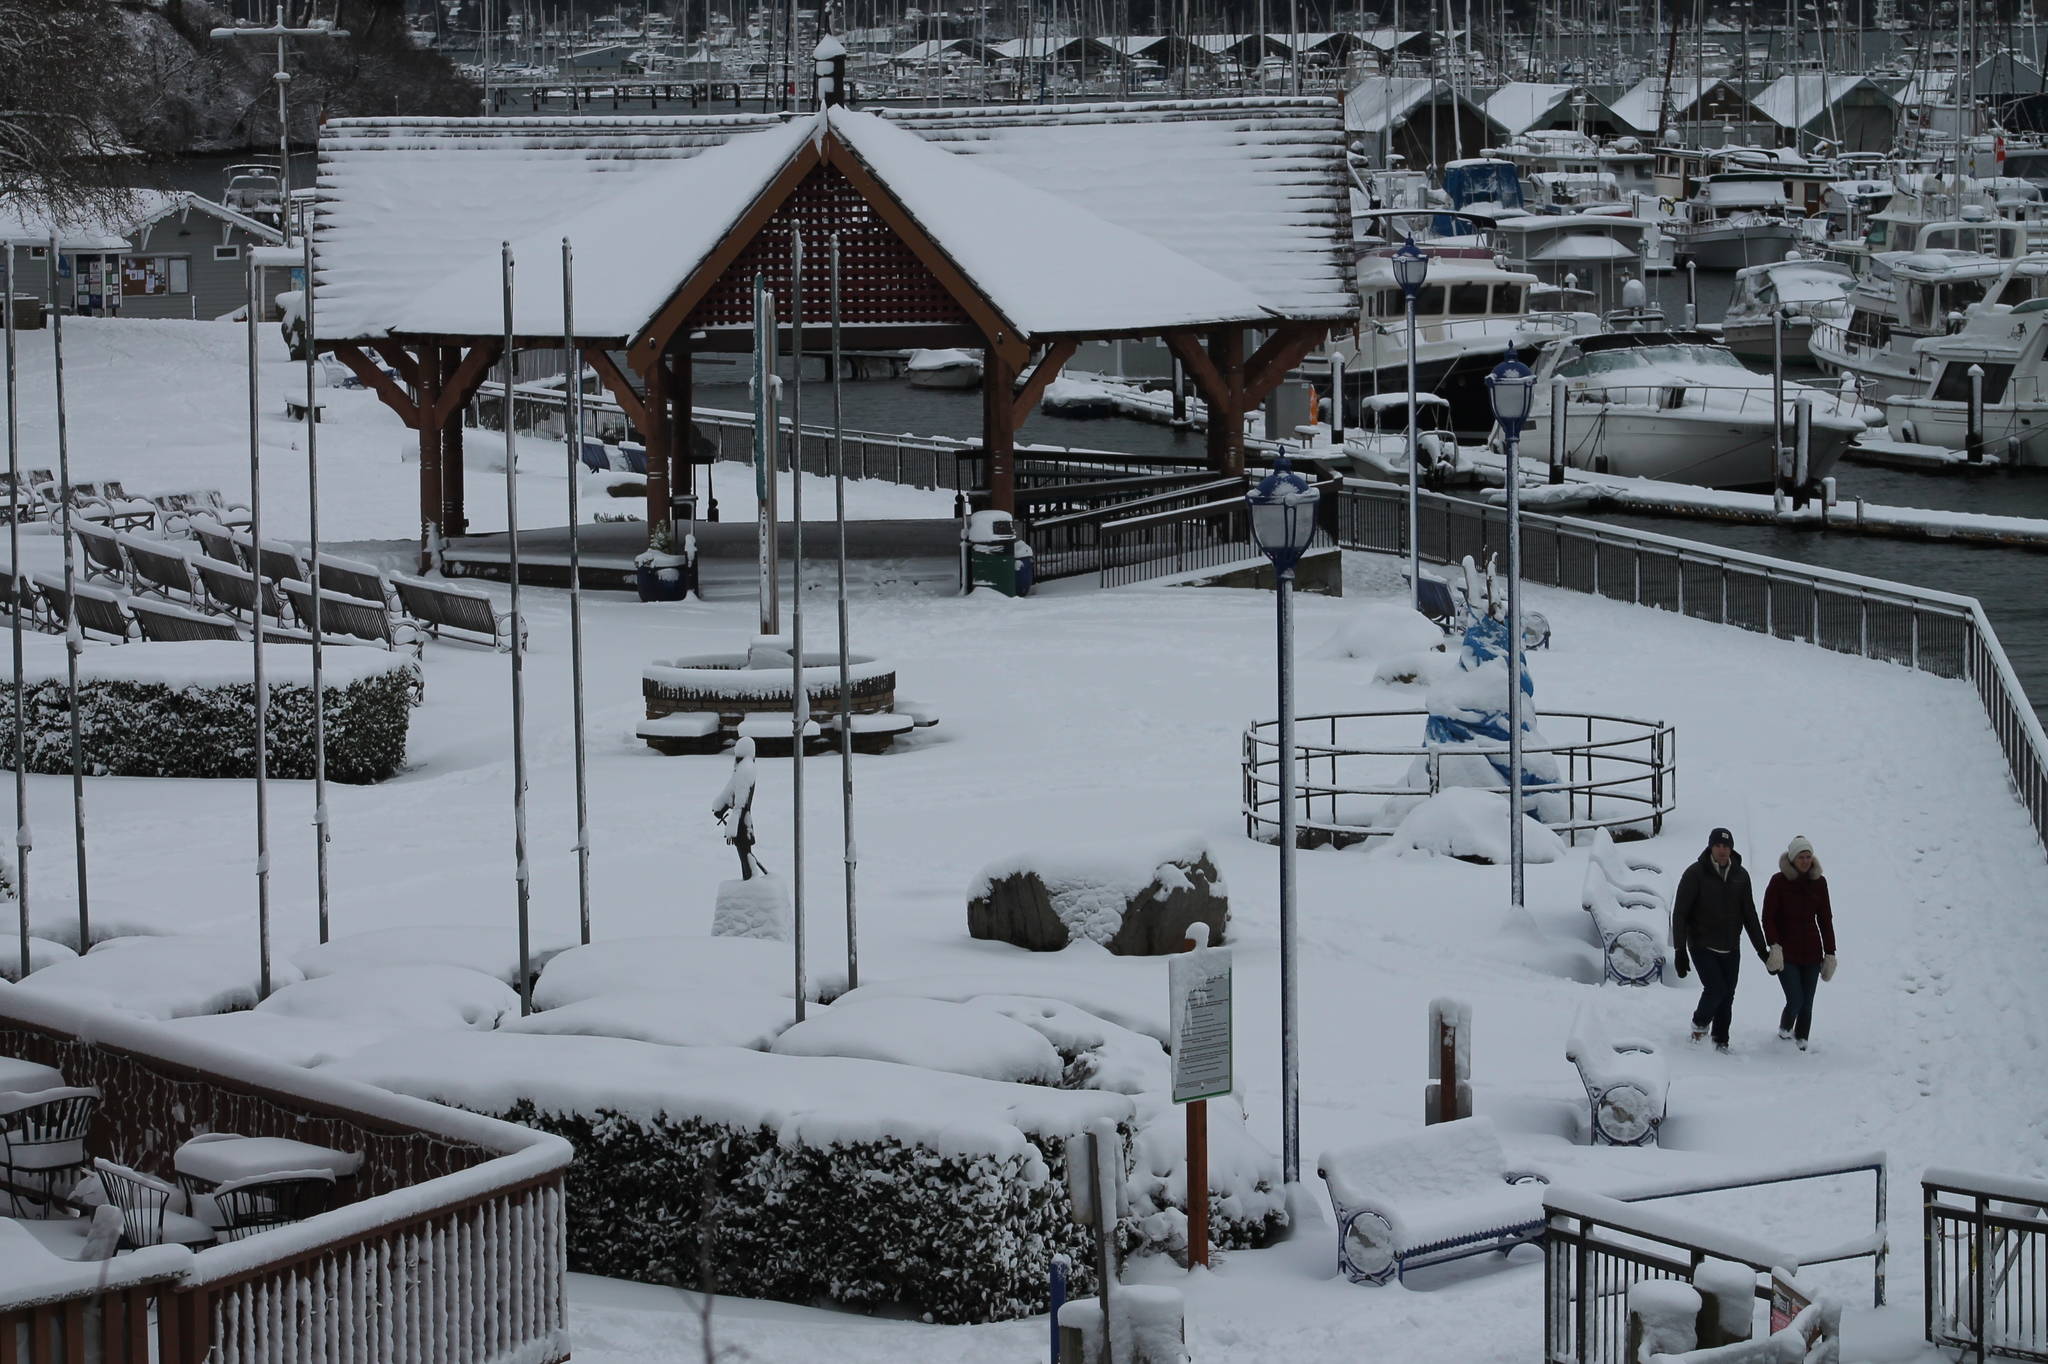 Muriel Iverson Williams Waterfront Park in Poulsbo was covered in snow. (Mark Krulish/Kitsap News Group)